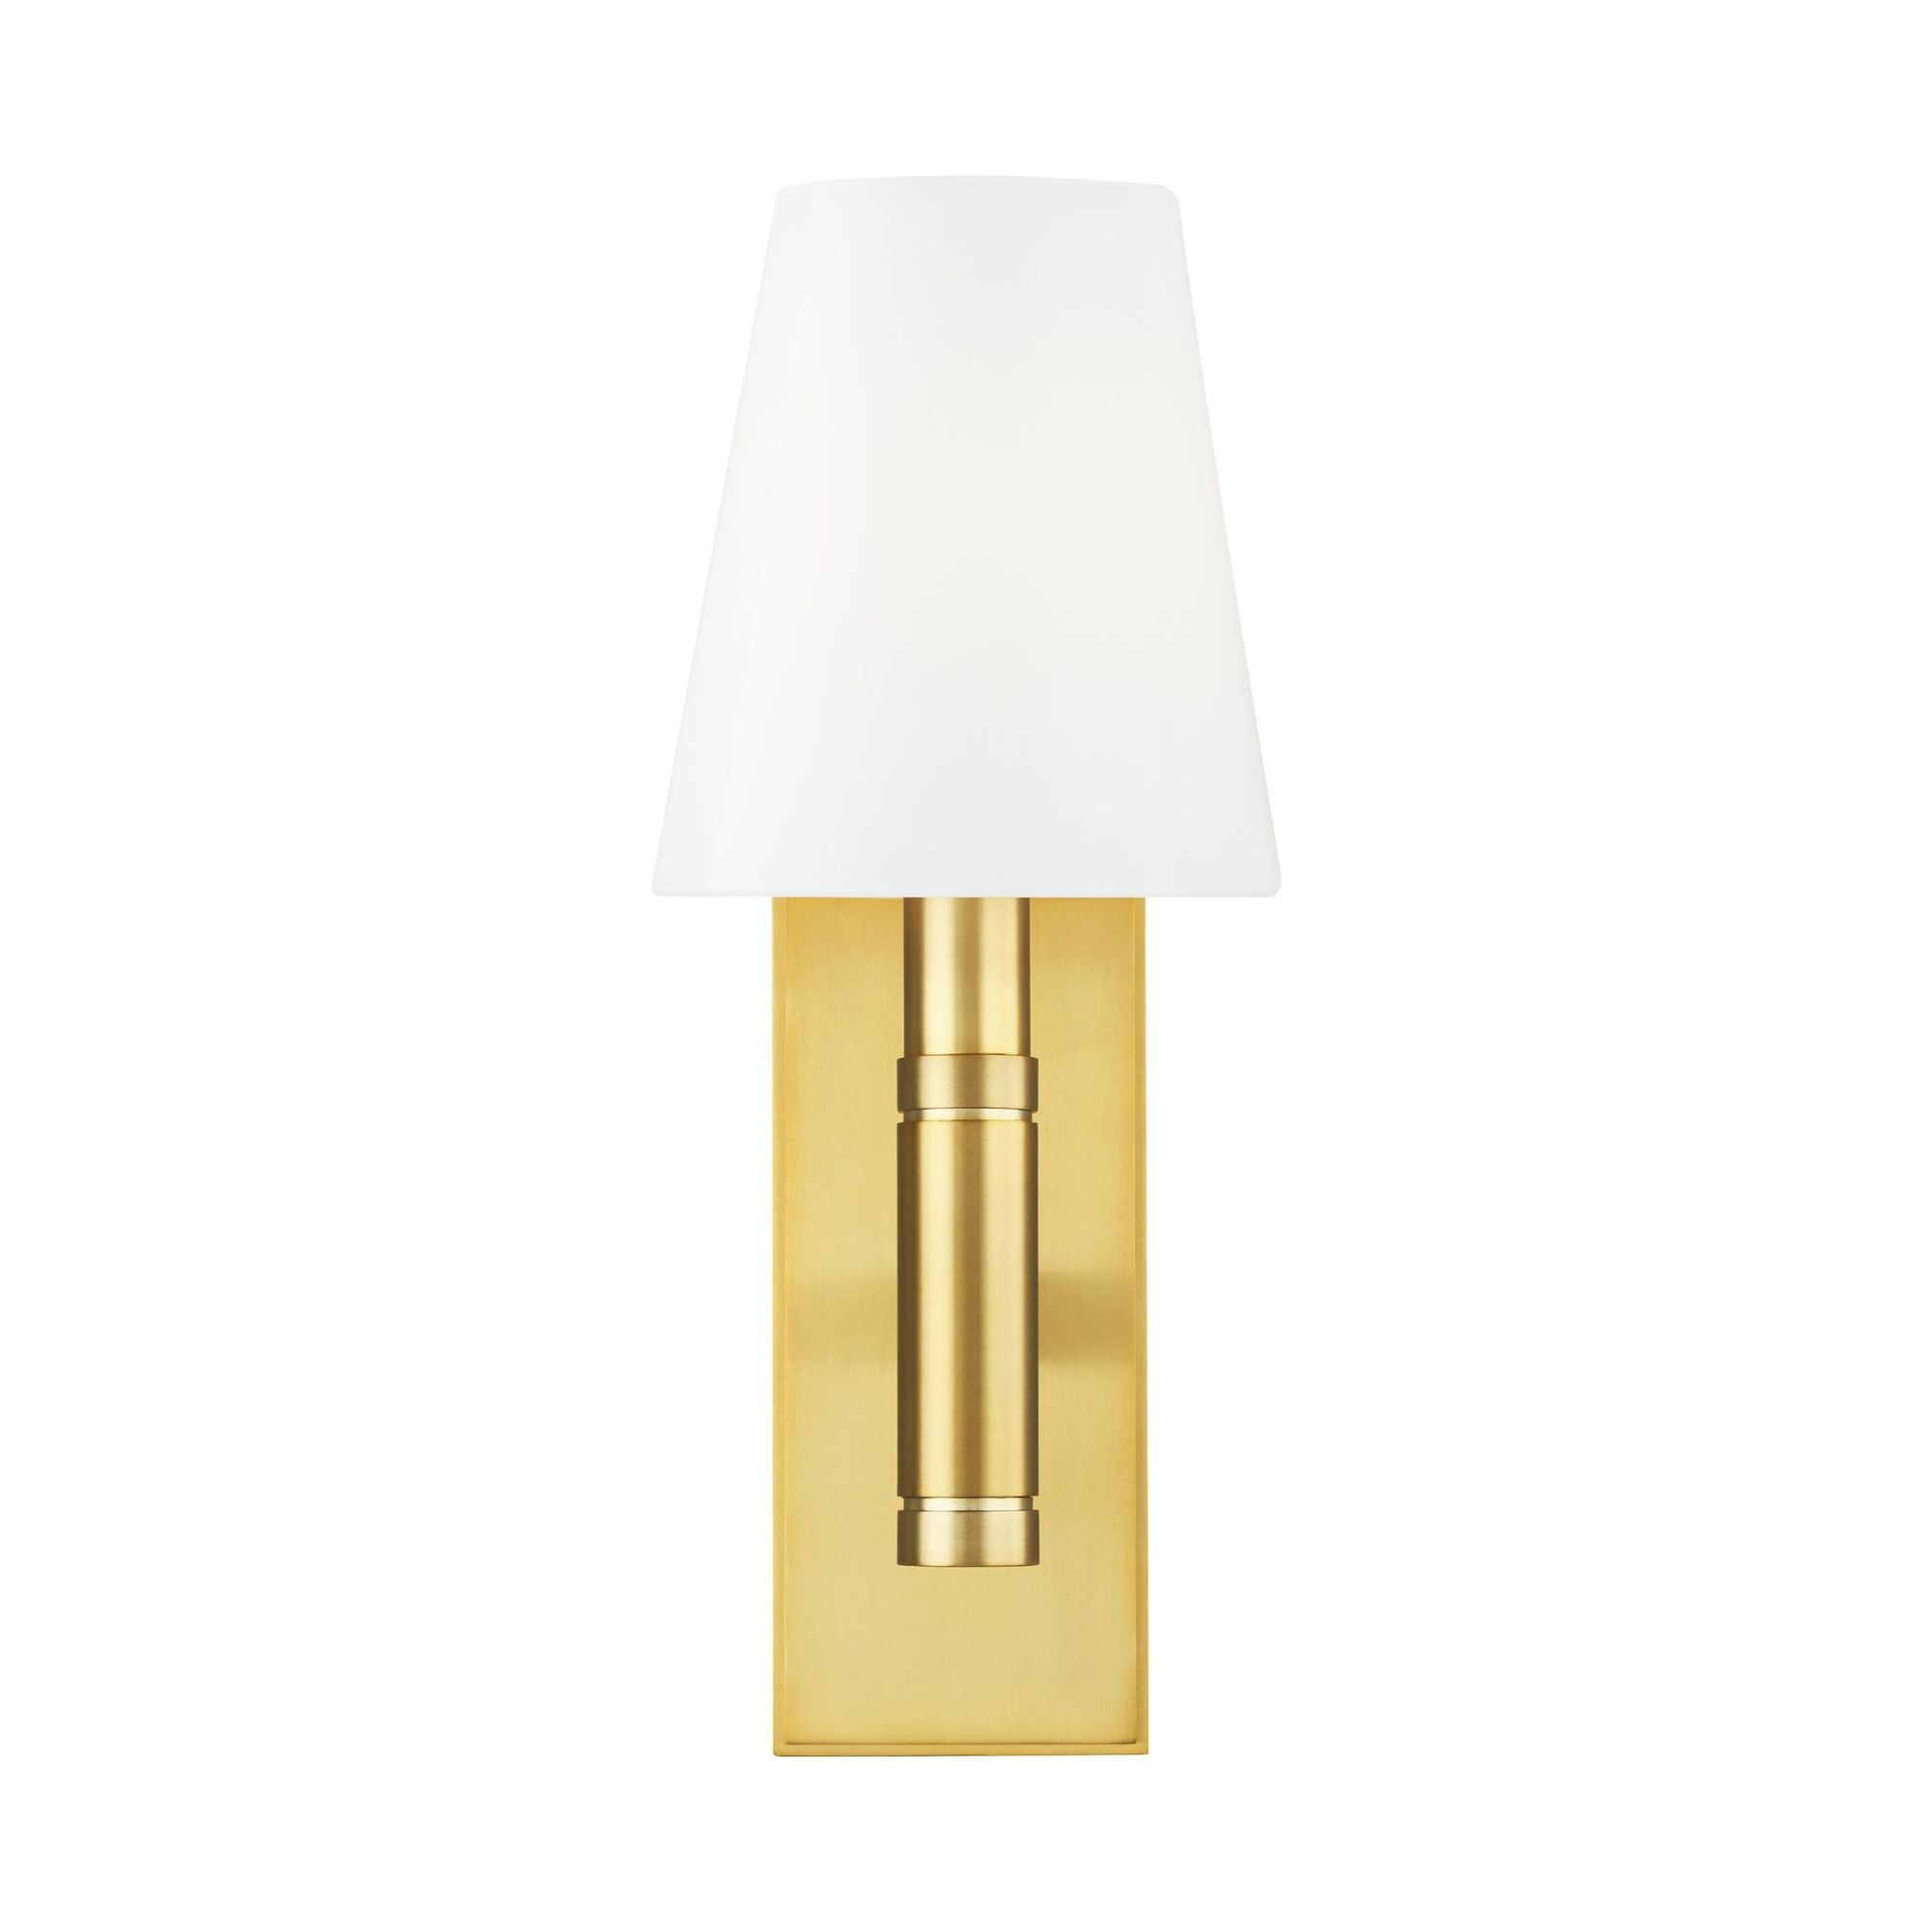 Thomas O'Brien Beckham Classic Rectangular Sconce in Burnished Brass